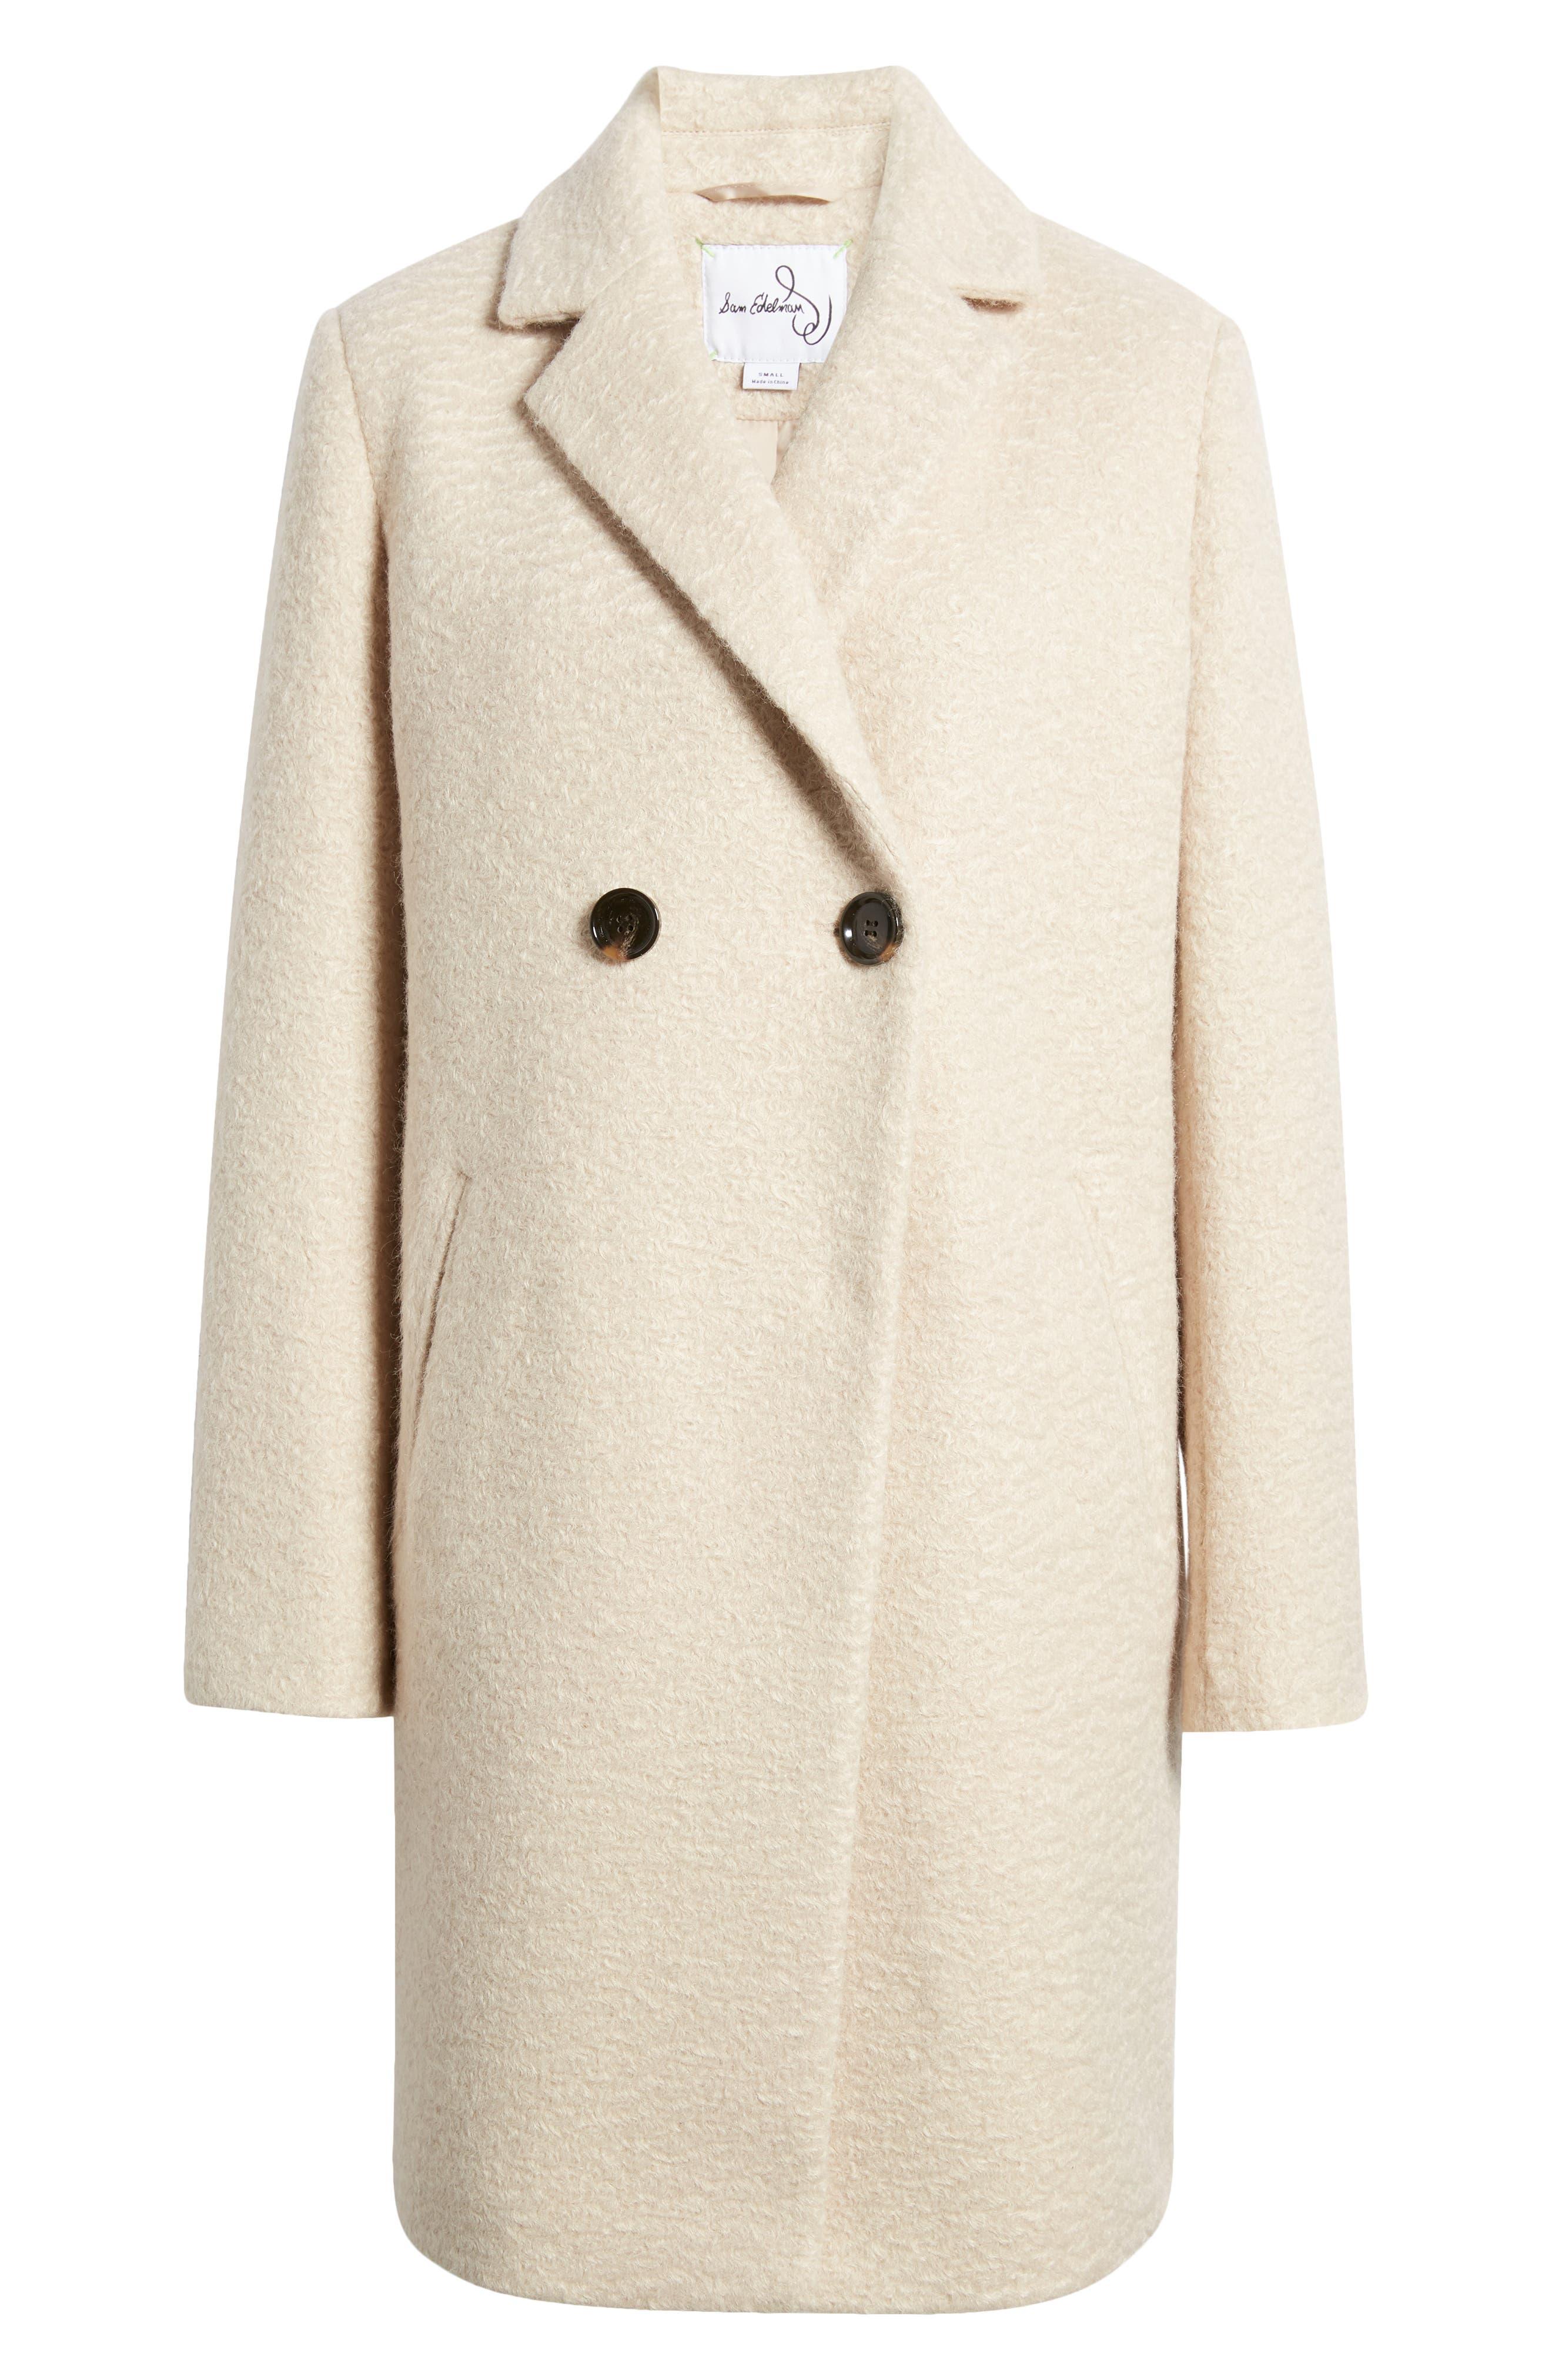 Sam Edelman Bouclé Tweed Double Breasted Coat in Natural | Lyst